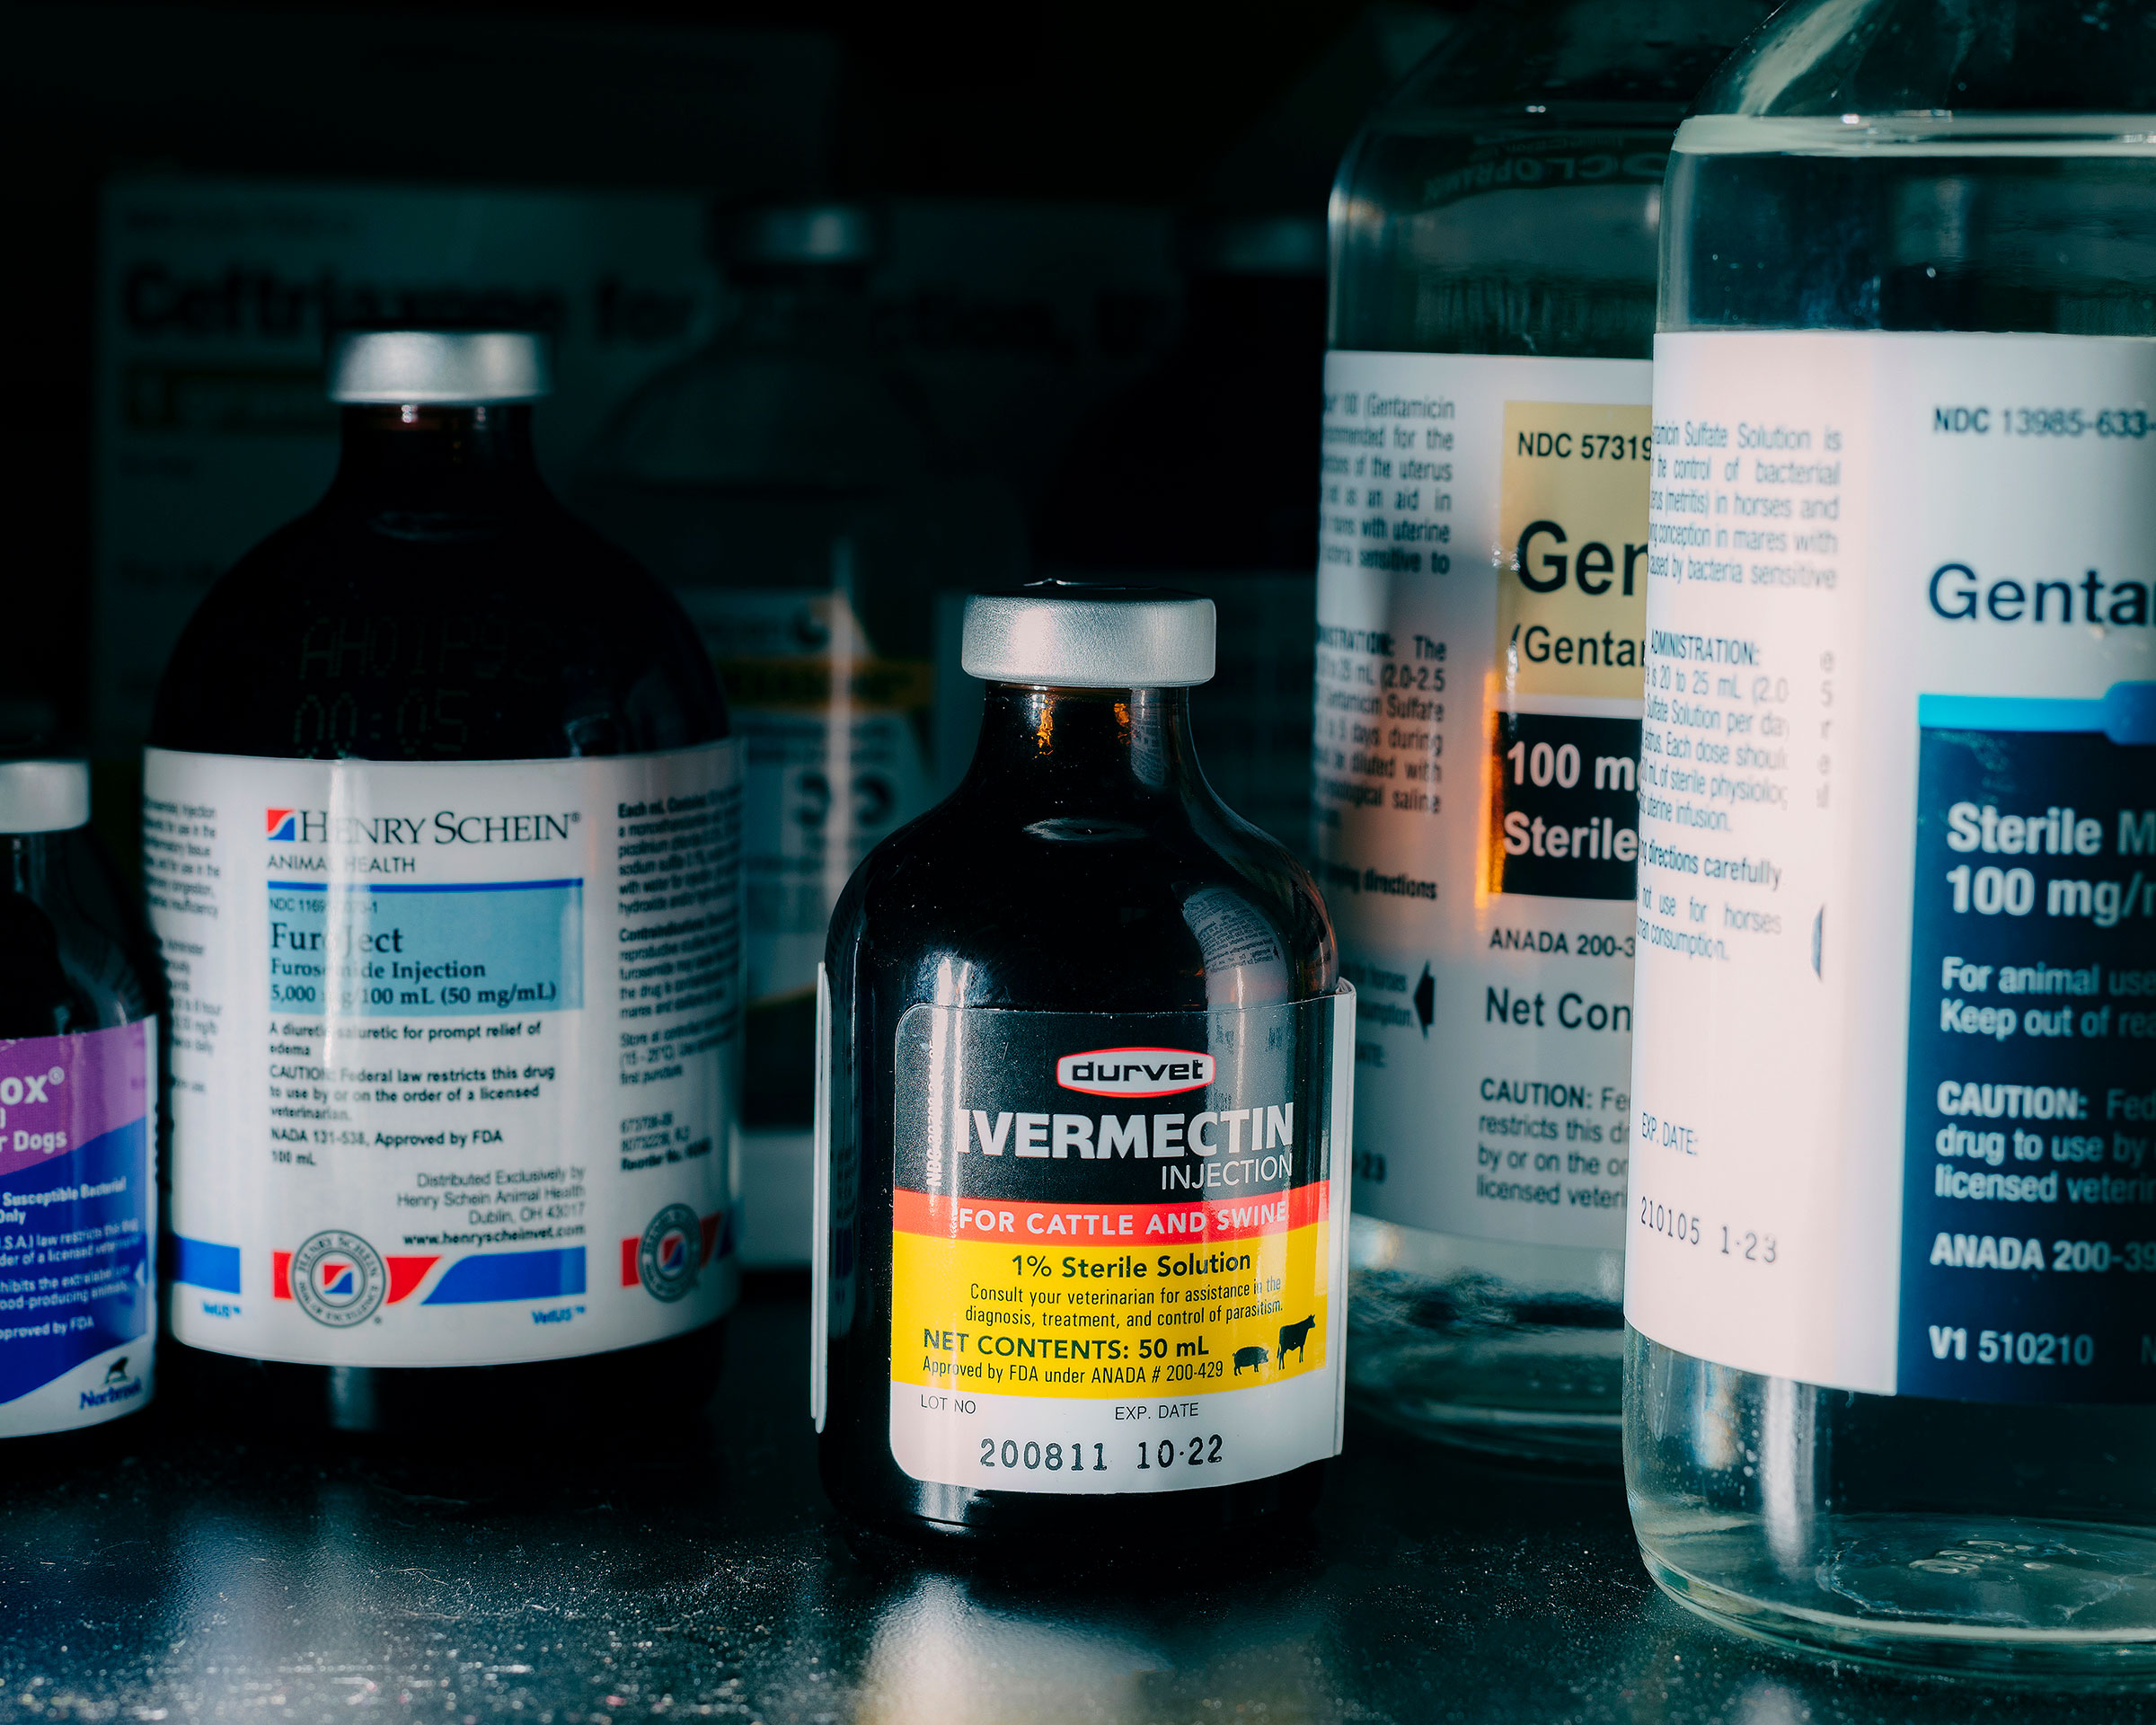 A bottle of Ivermectin in West Point, Miss. on Sept. 18, 2021. (Houston Cofield/The New York Times)